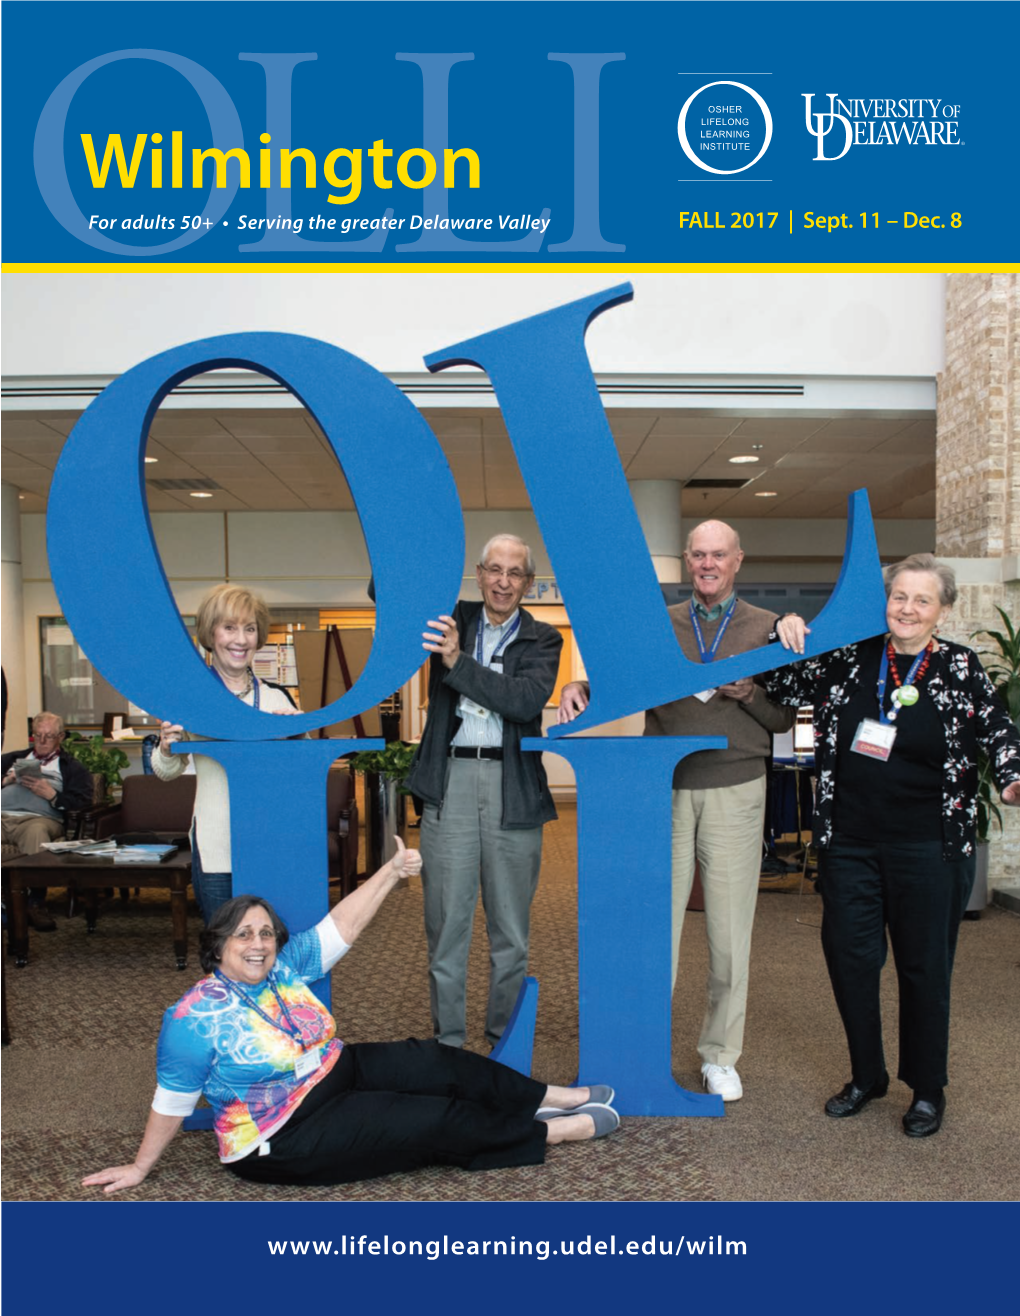 Wilmington Olfor Adults 50+ • Serving the Greaterli Delaware Valley FALL 2017 | Sept